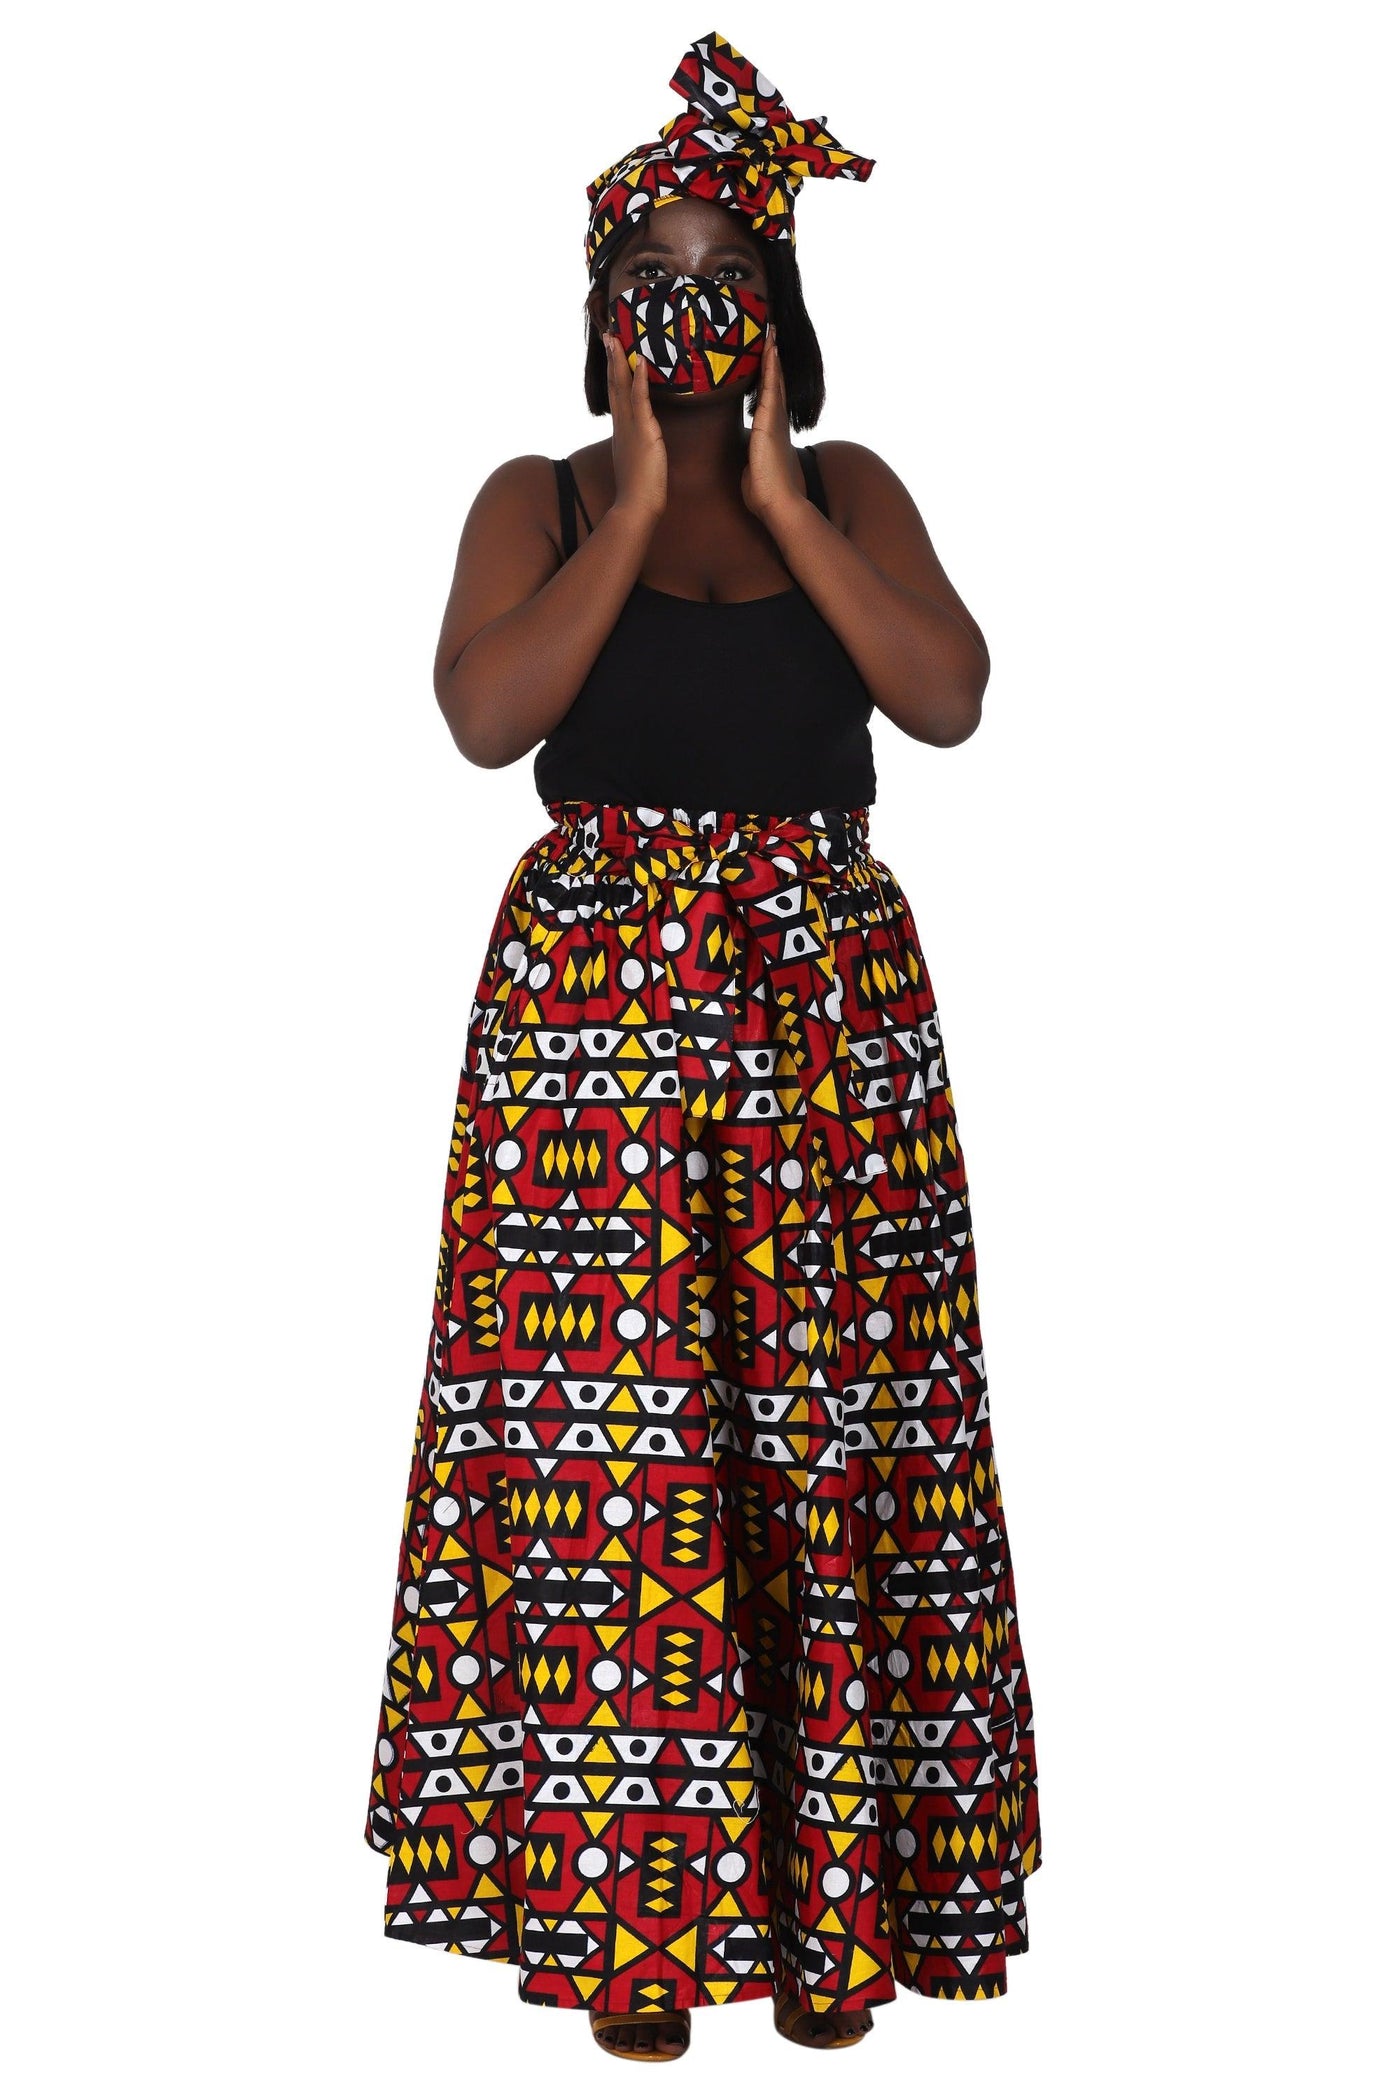 African Print Wax Print Skirt One Size Fits Most Headwrap Included Elastic Waist Pockets 16317  - Advance Apparels Inc